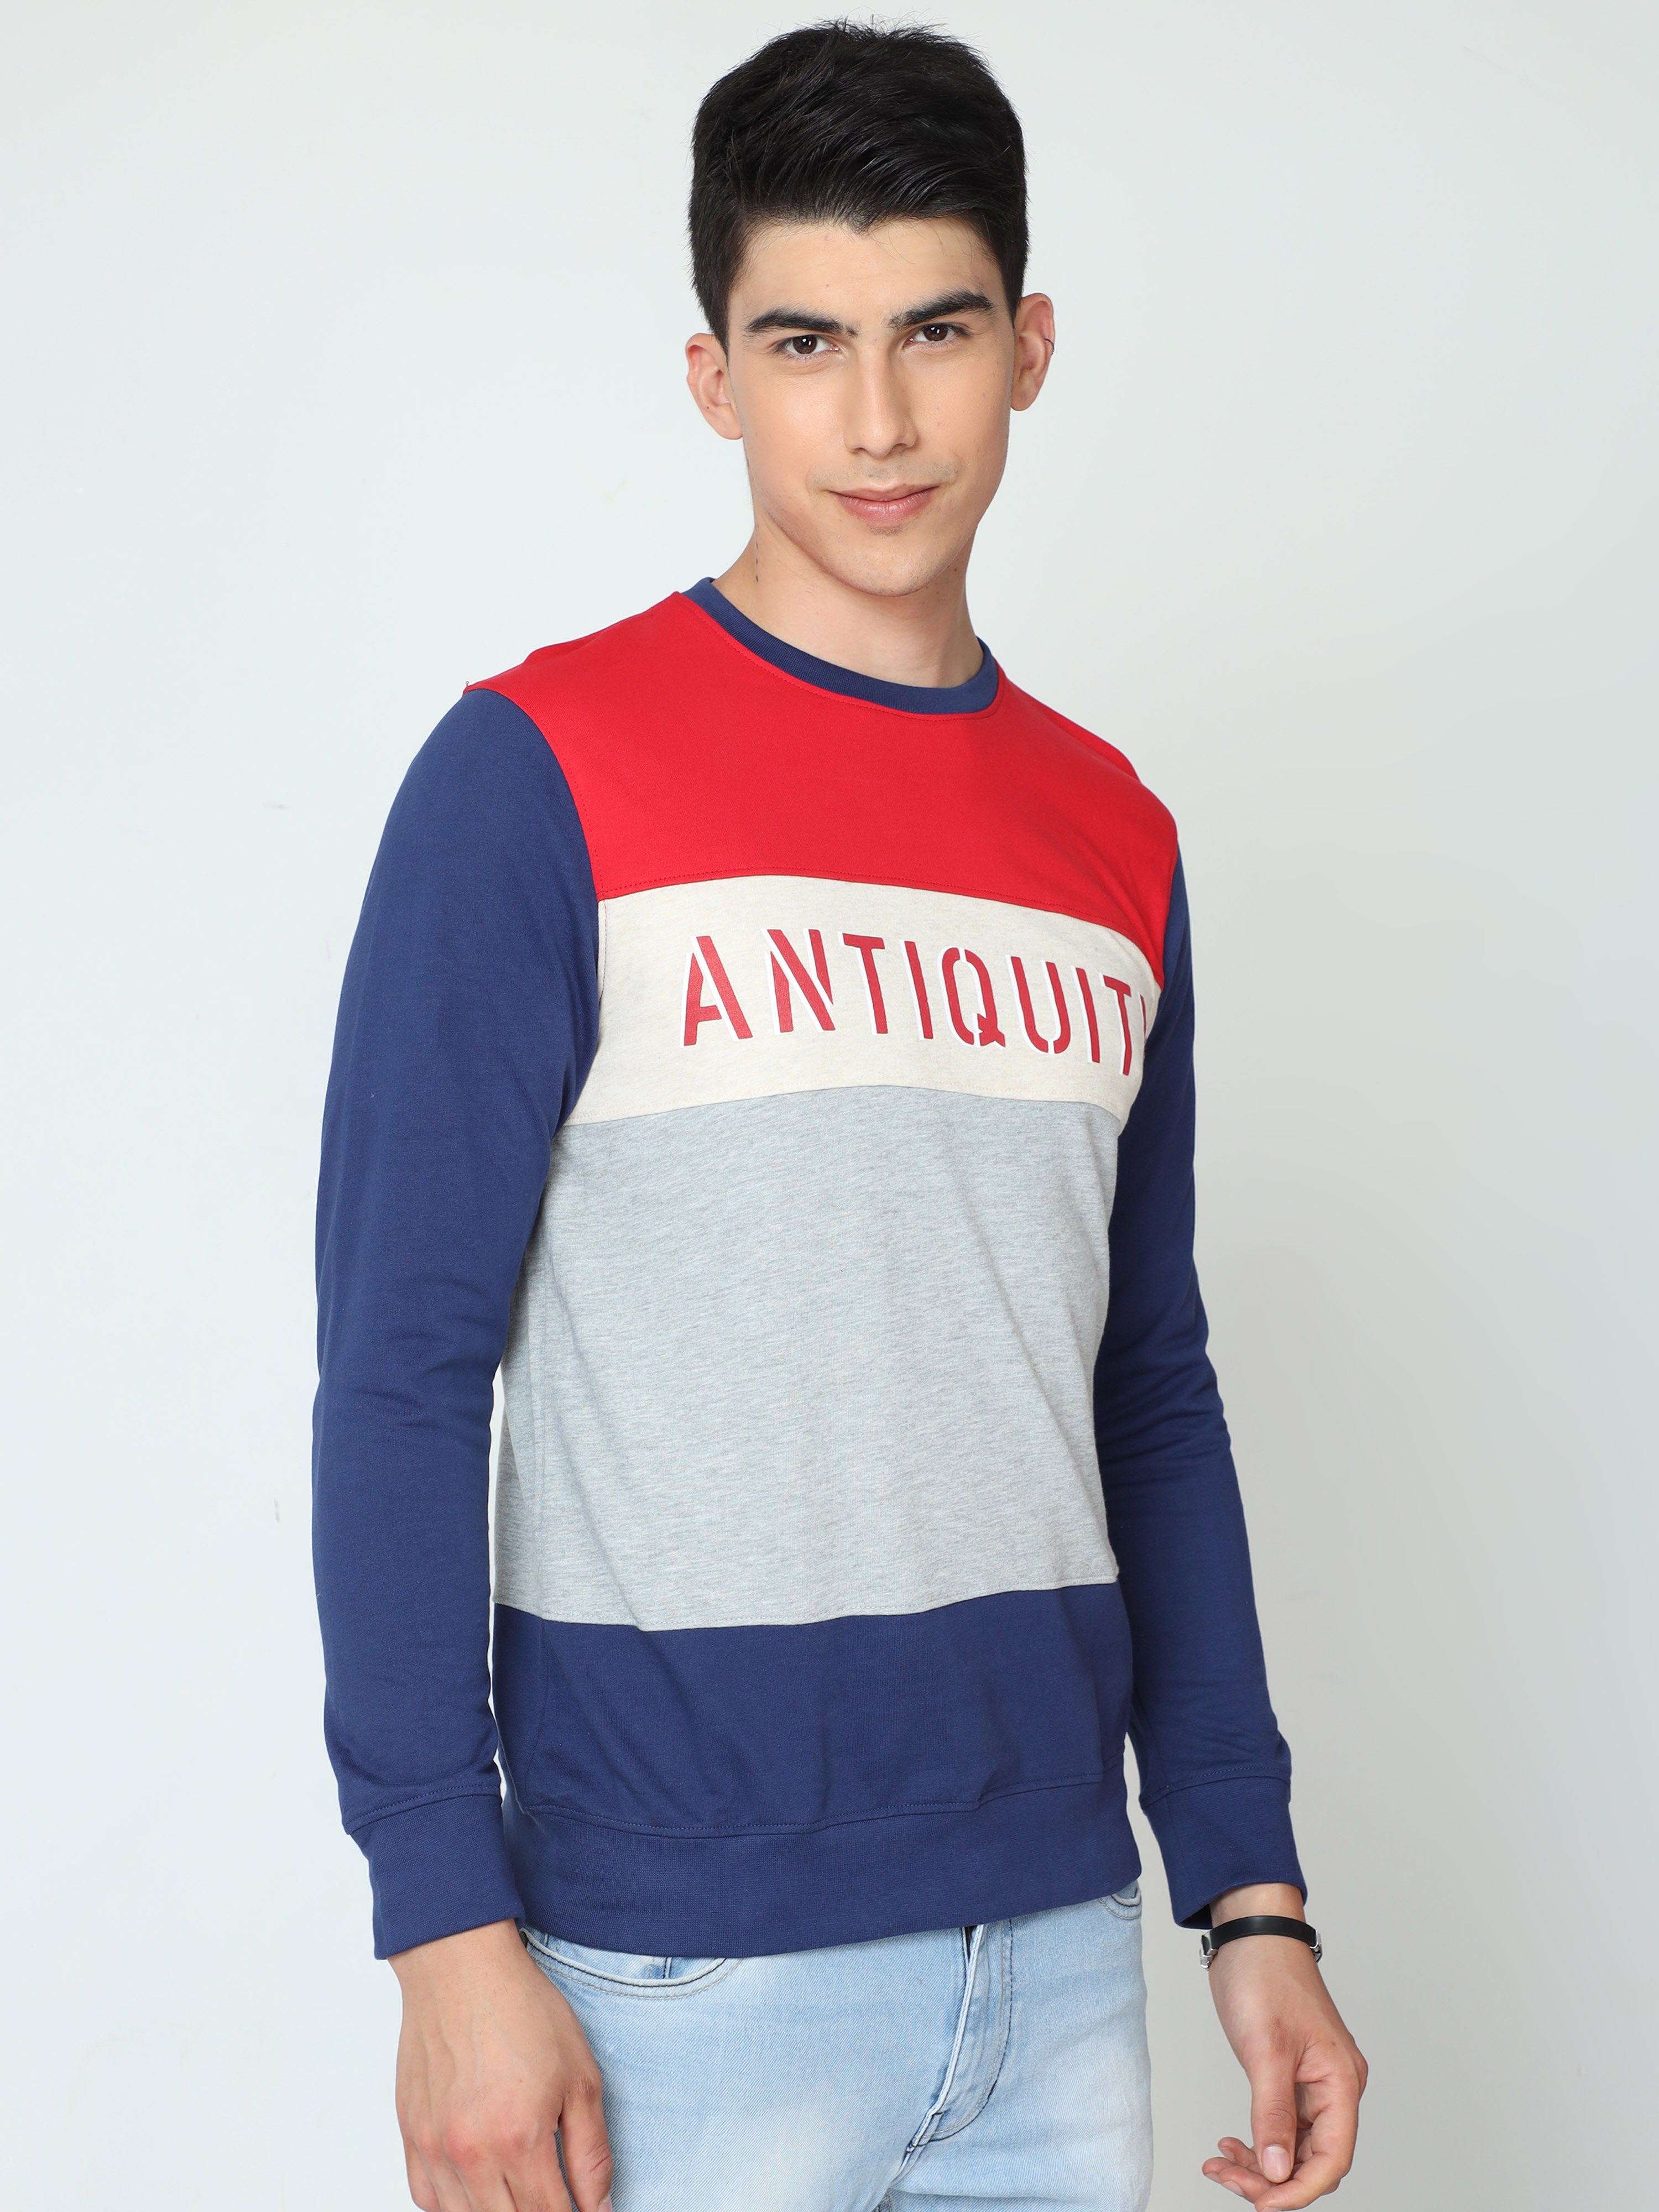 Classic Polo Mens 100% Cotton Multi Color Blocked Crew Neck Full Sleeves Slim Fit Sweat Shirt |Cp-Ss-11